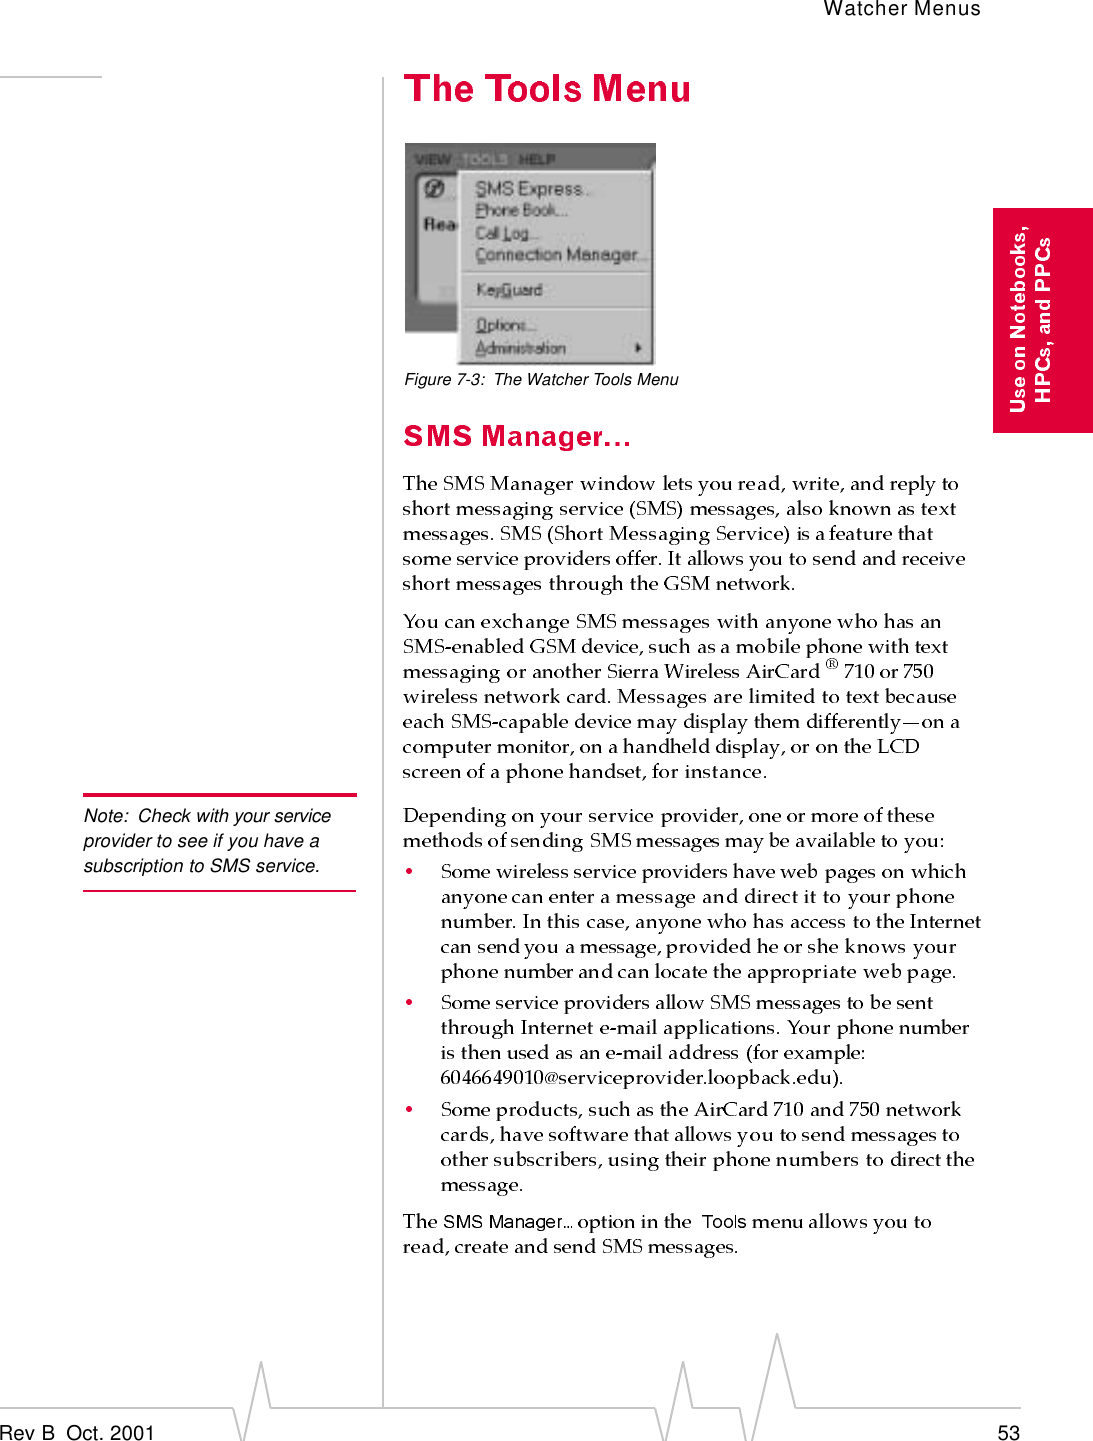 Watcher MenusRev B  Oct. 2001 53Figure 7-3: The Watcher Tools MenuNote: Check with your service provider to see if you have a subscription to SMS service.